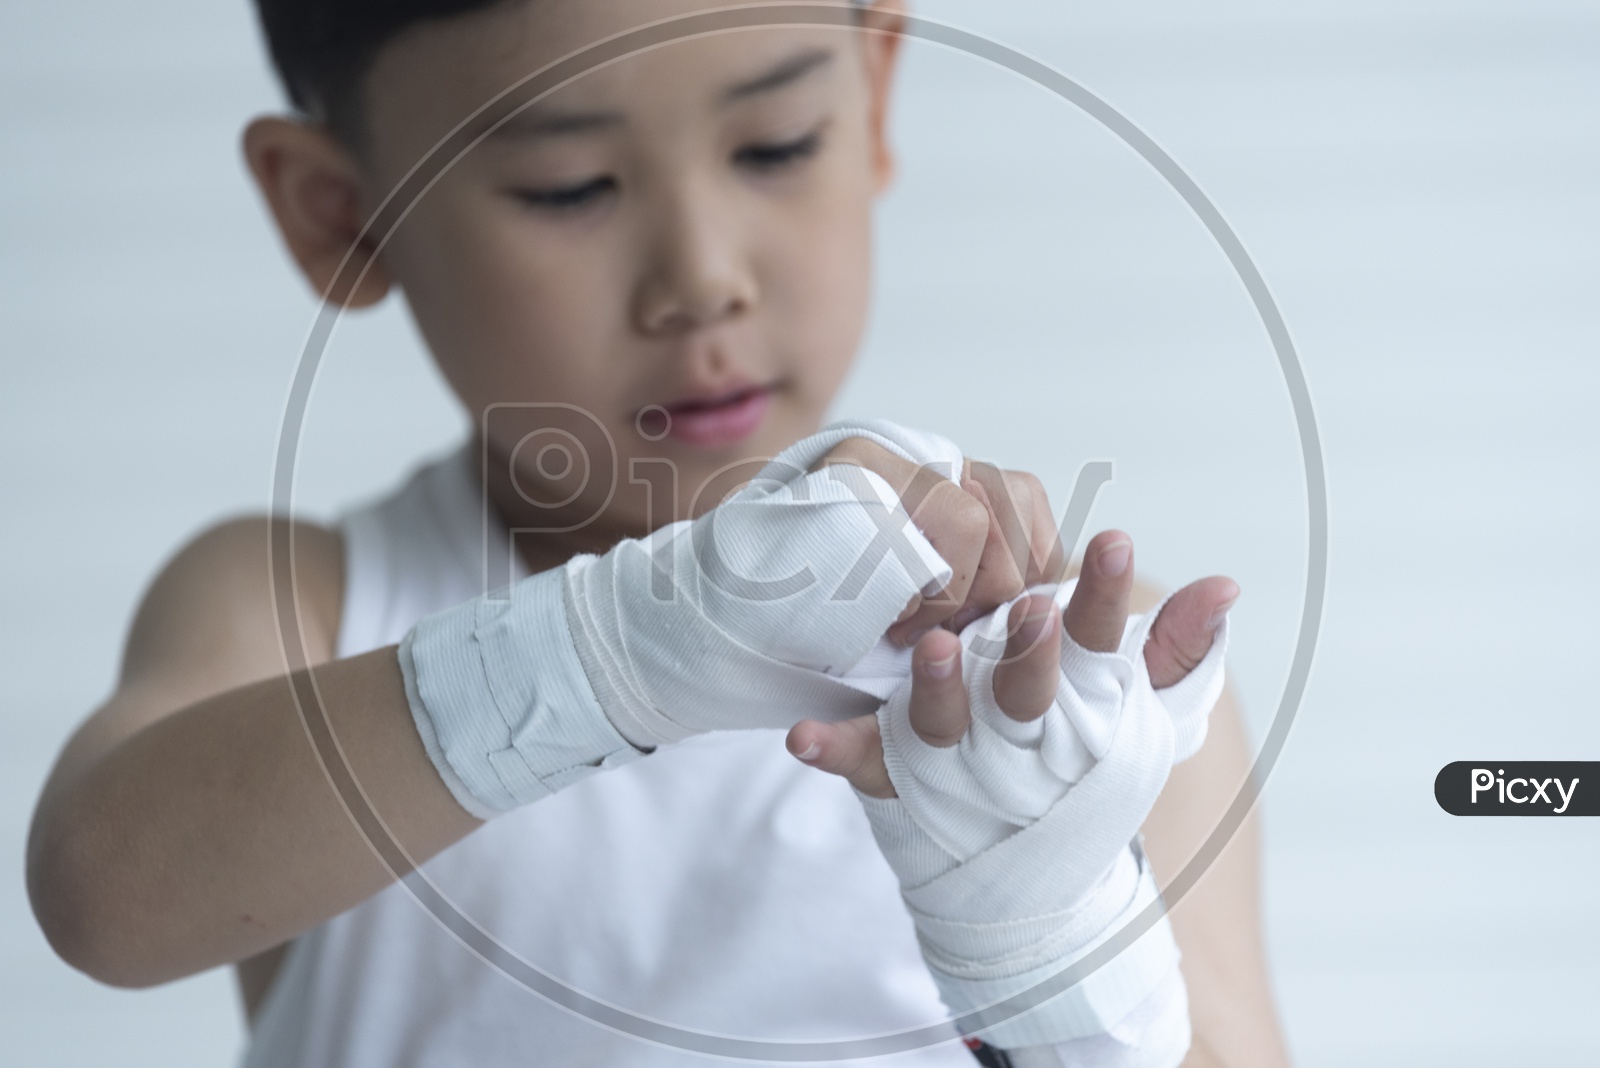 A Young Thai Boy  Boxer Wrapping His Hand For Boxing